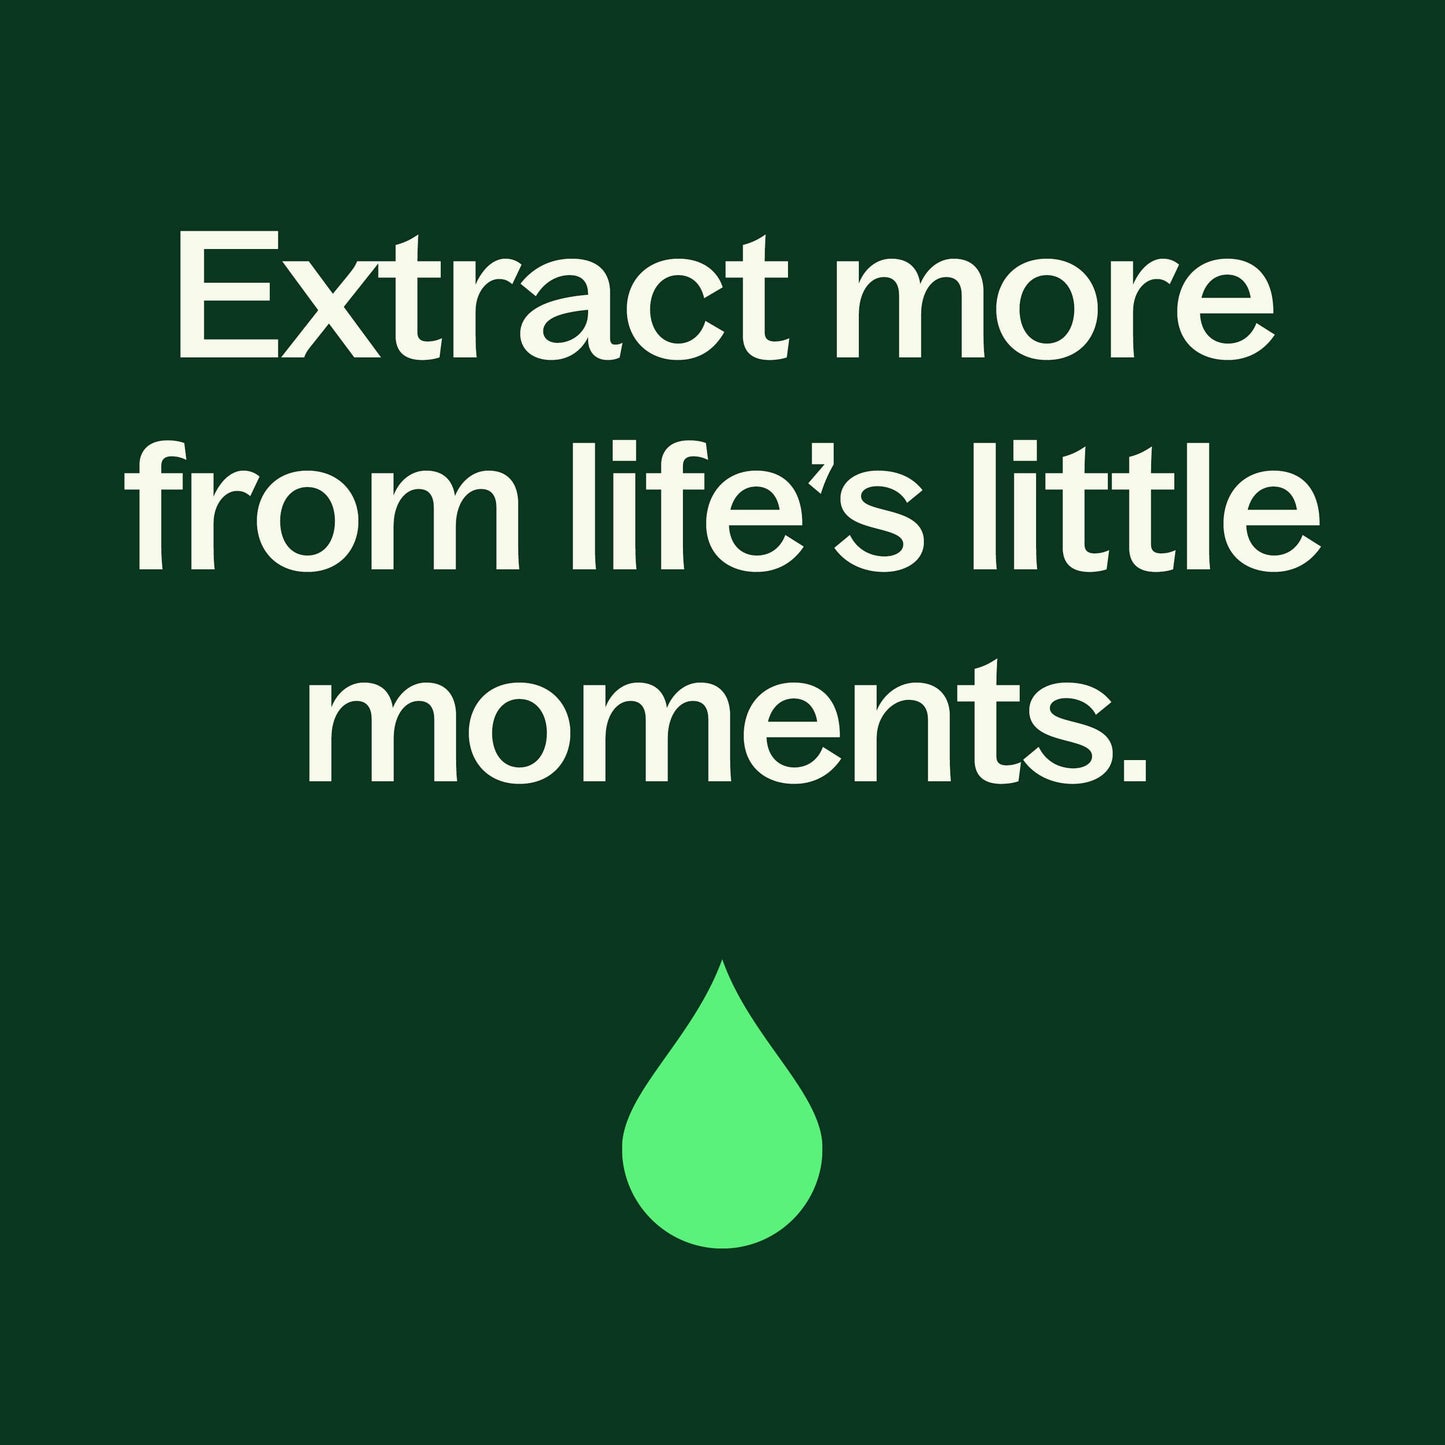 extract more from life's little moments